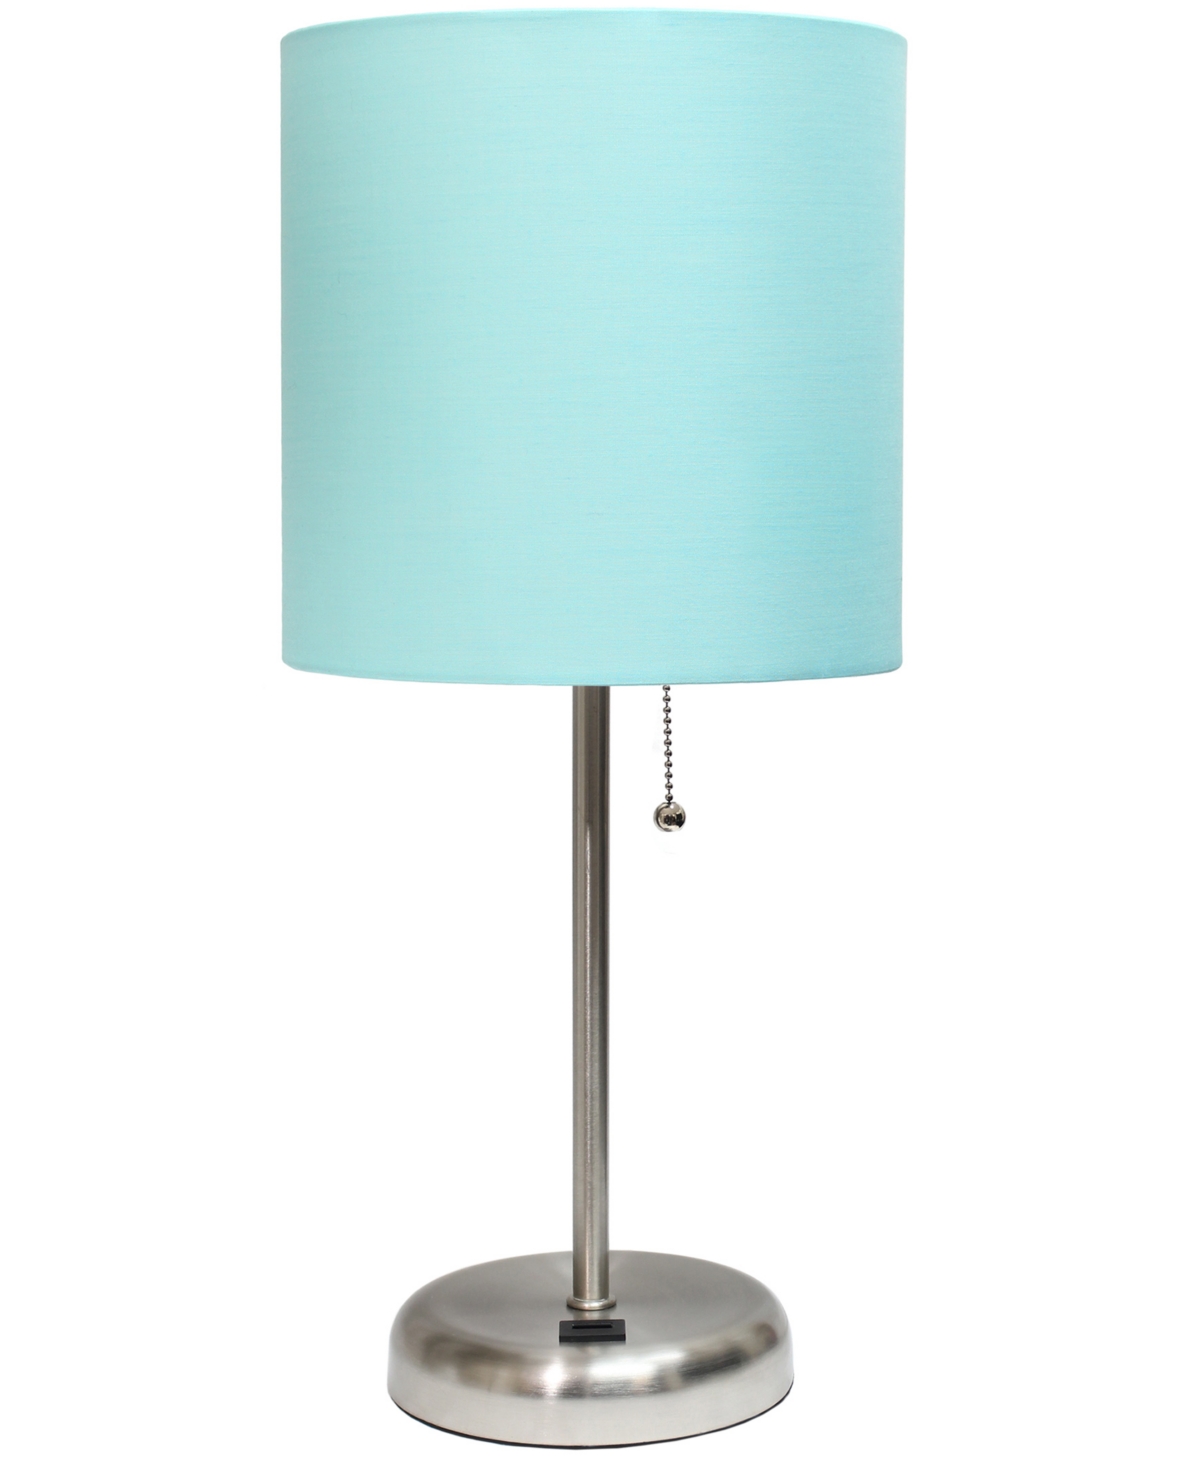 Shop Creekwood Home Oslo 19.5" Contemporary Bedside Usb Port Feature Standard Metal Table Desk Lamp In Br.steel,blue Shade